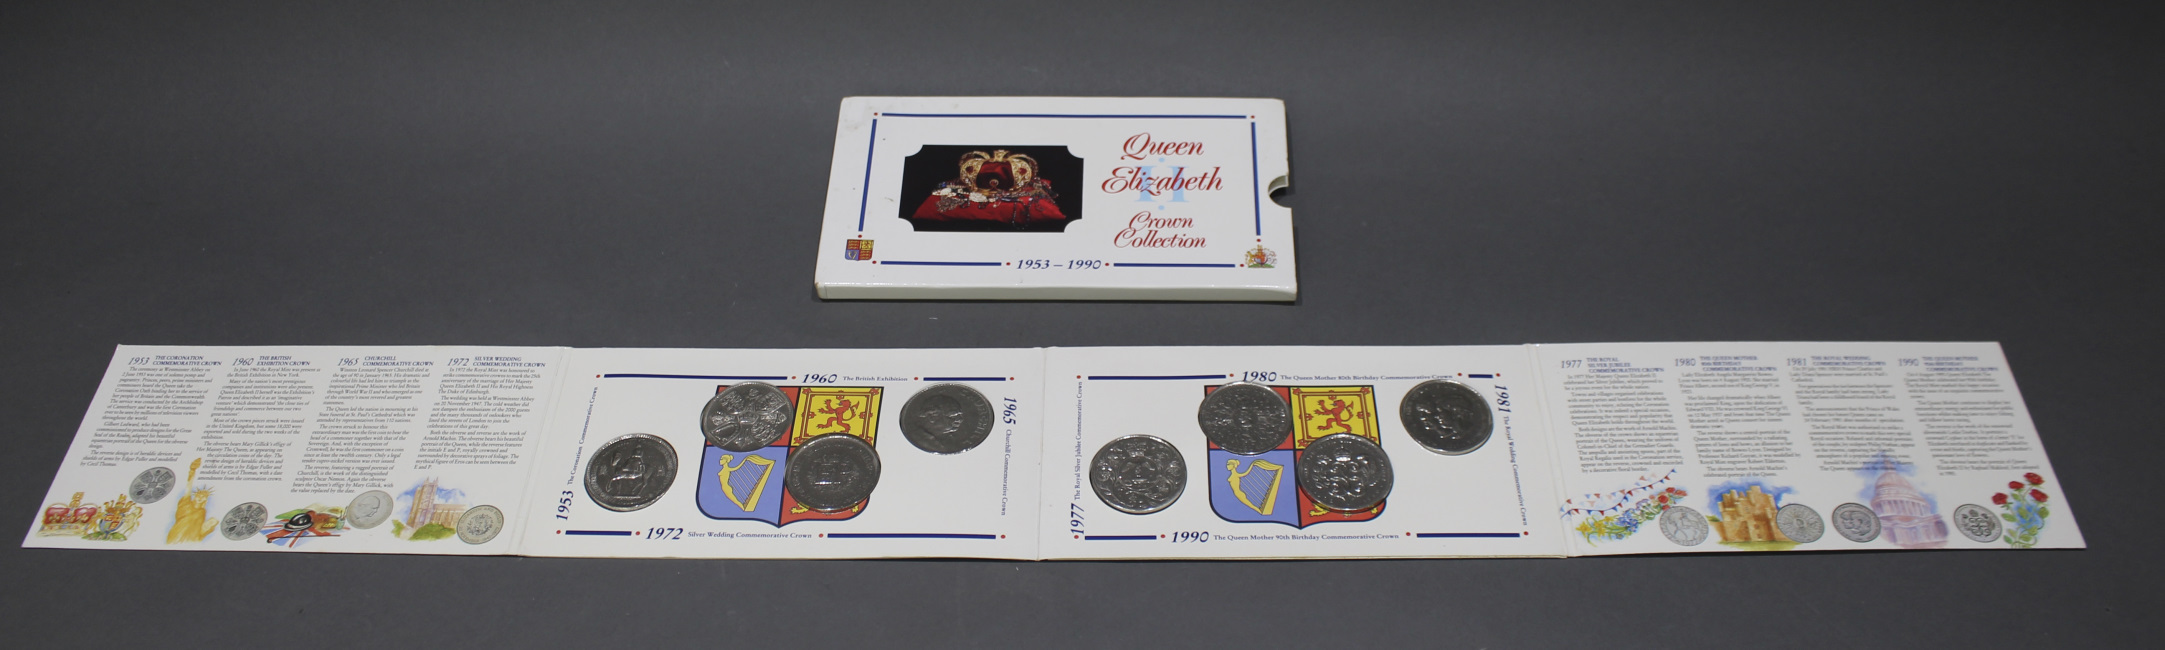 Queen Elizabeth 1953-1990 Crown Coin Collection - Image 3 of 8